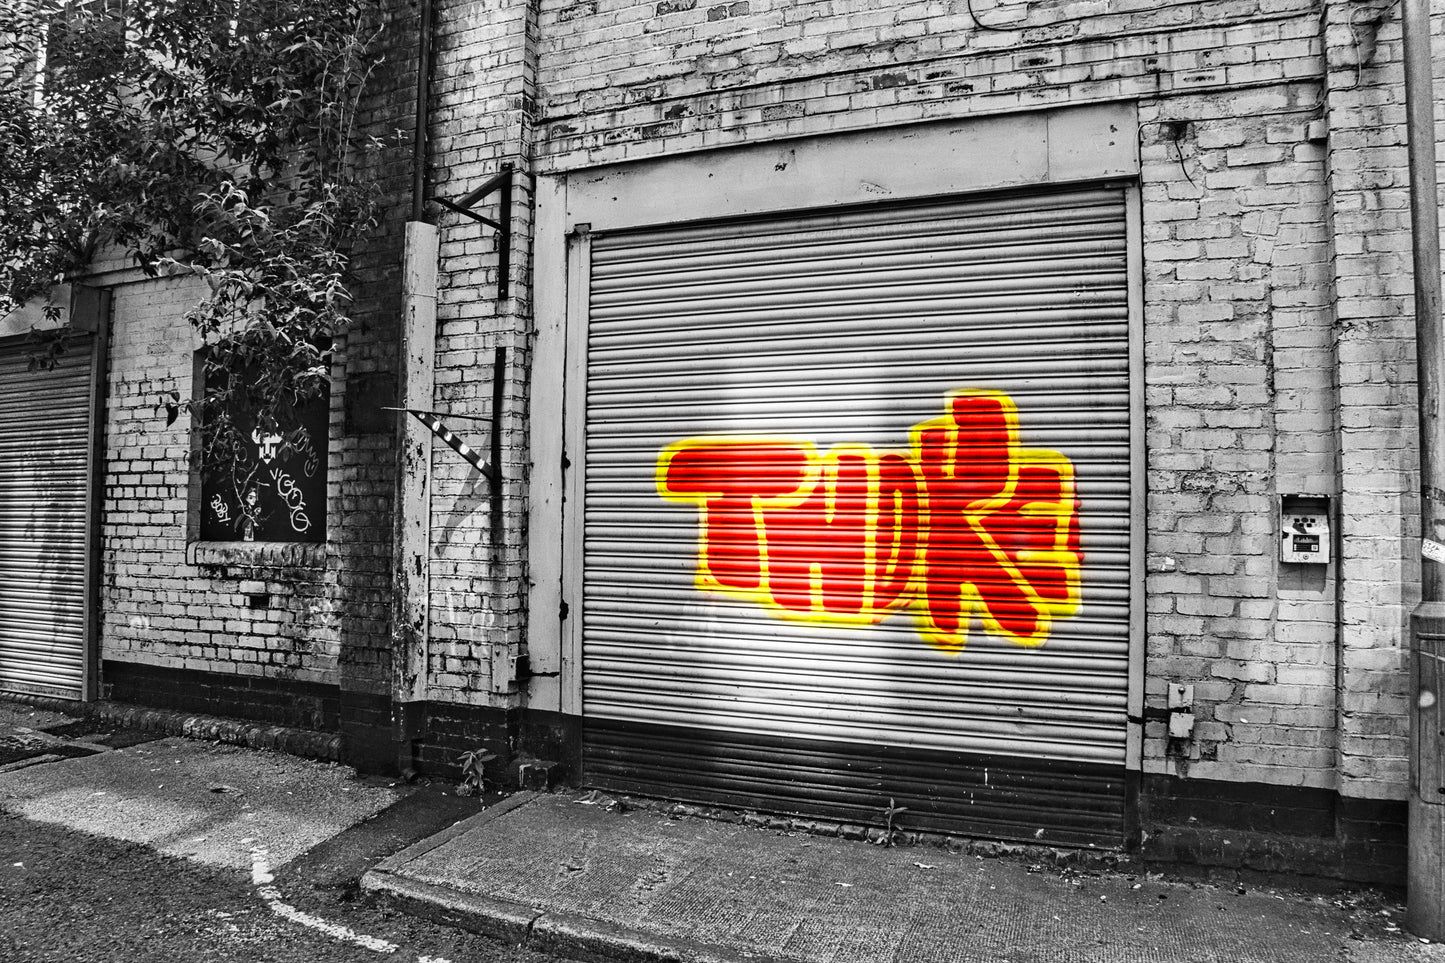 Liverpool Baltic Triangle Photo and Images -Liverpool Graffiti - Garage Door - PTI07473 - Photo by Photographer Martin Fisher - Picture The Image